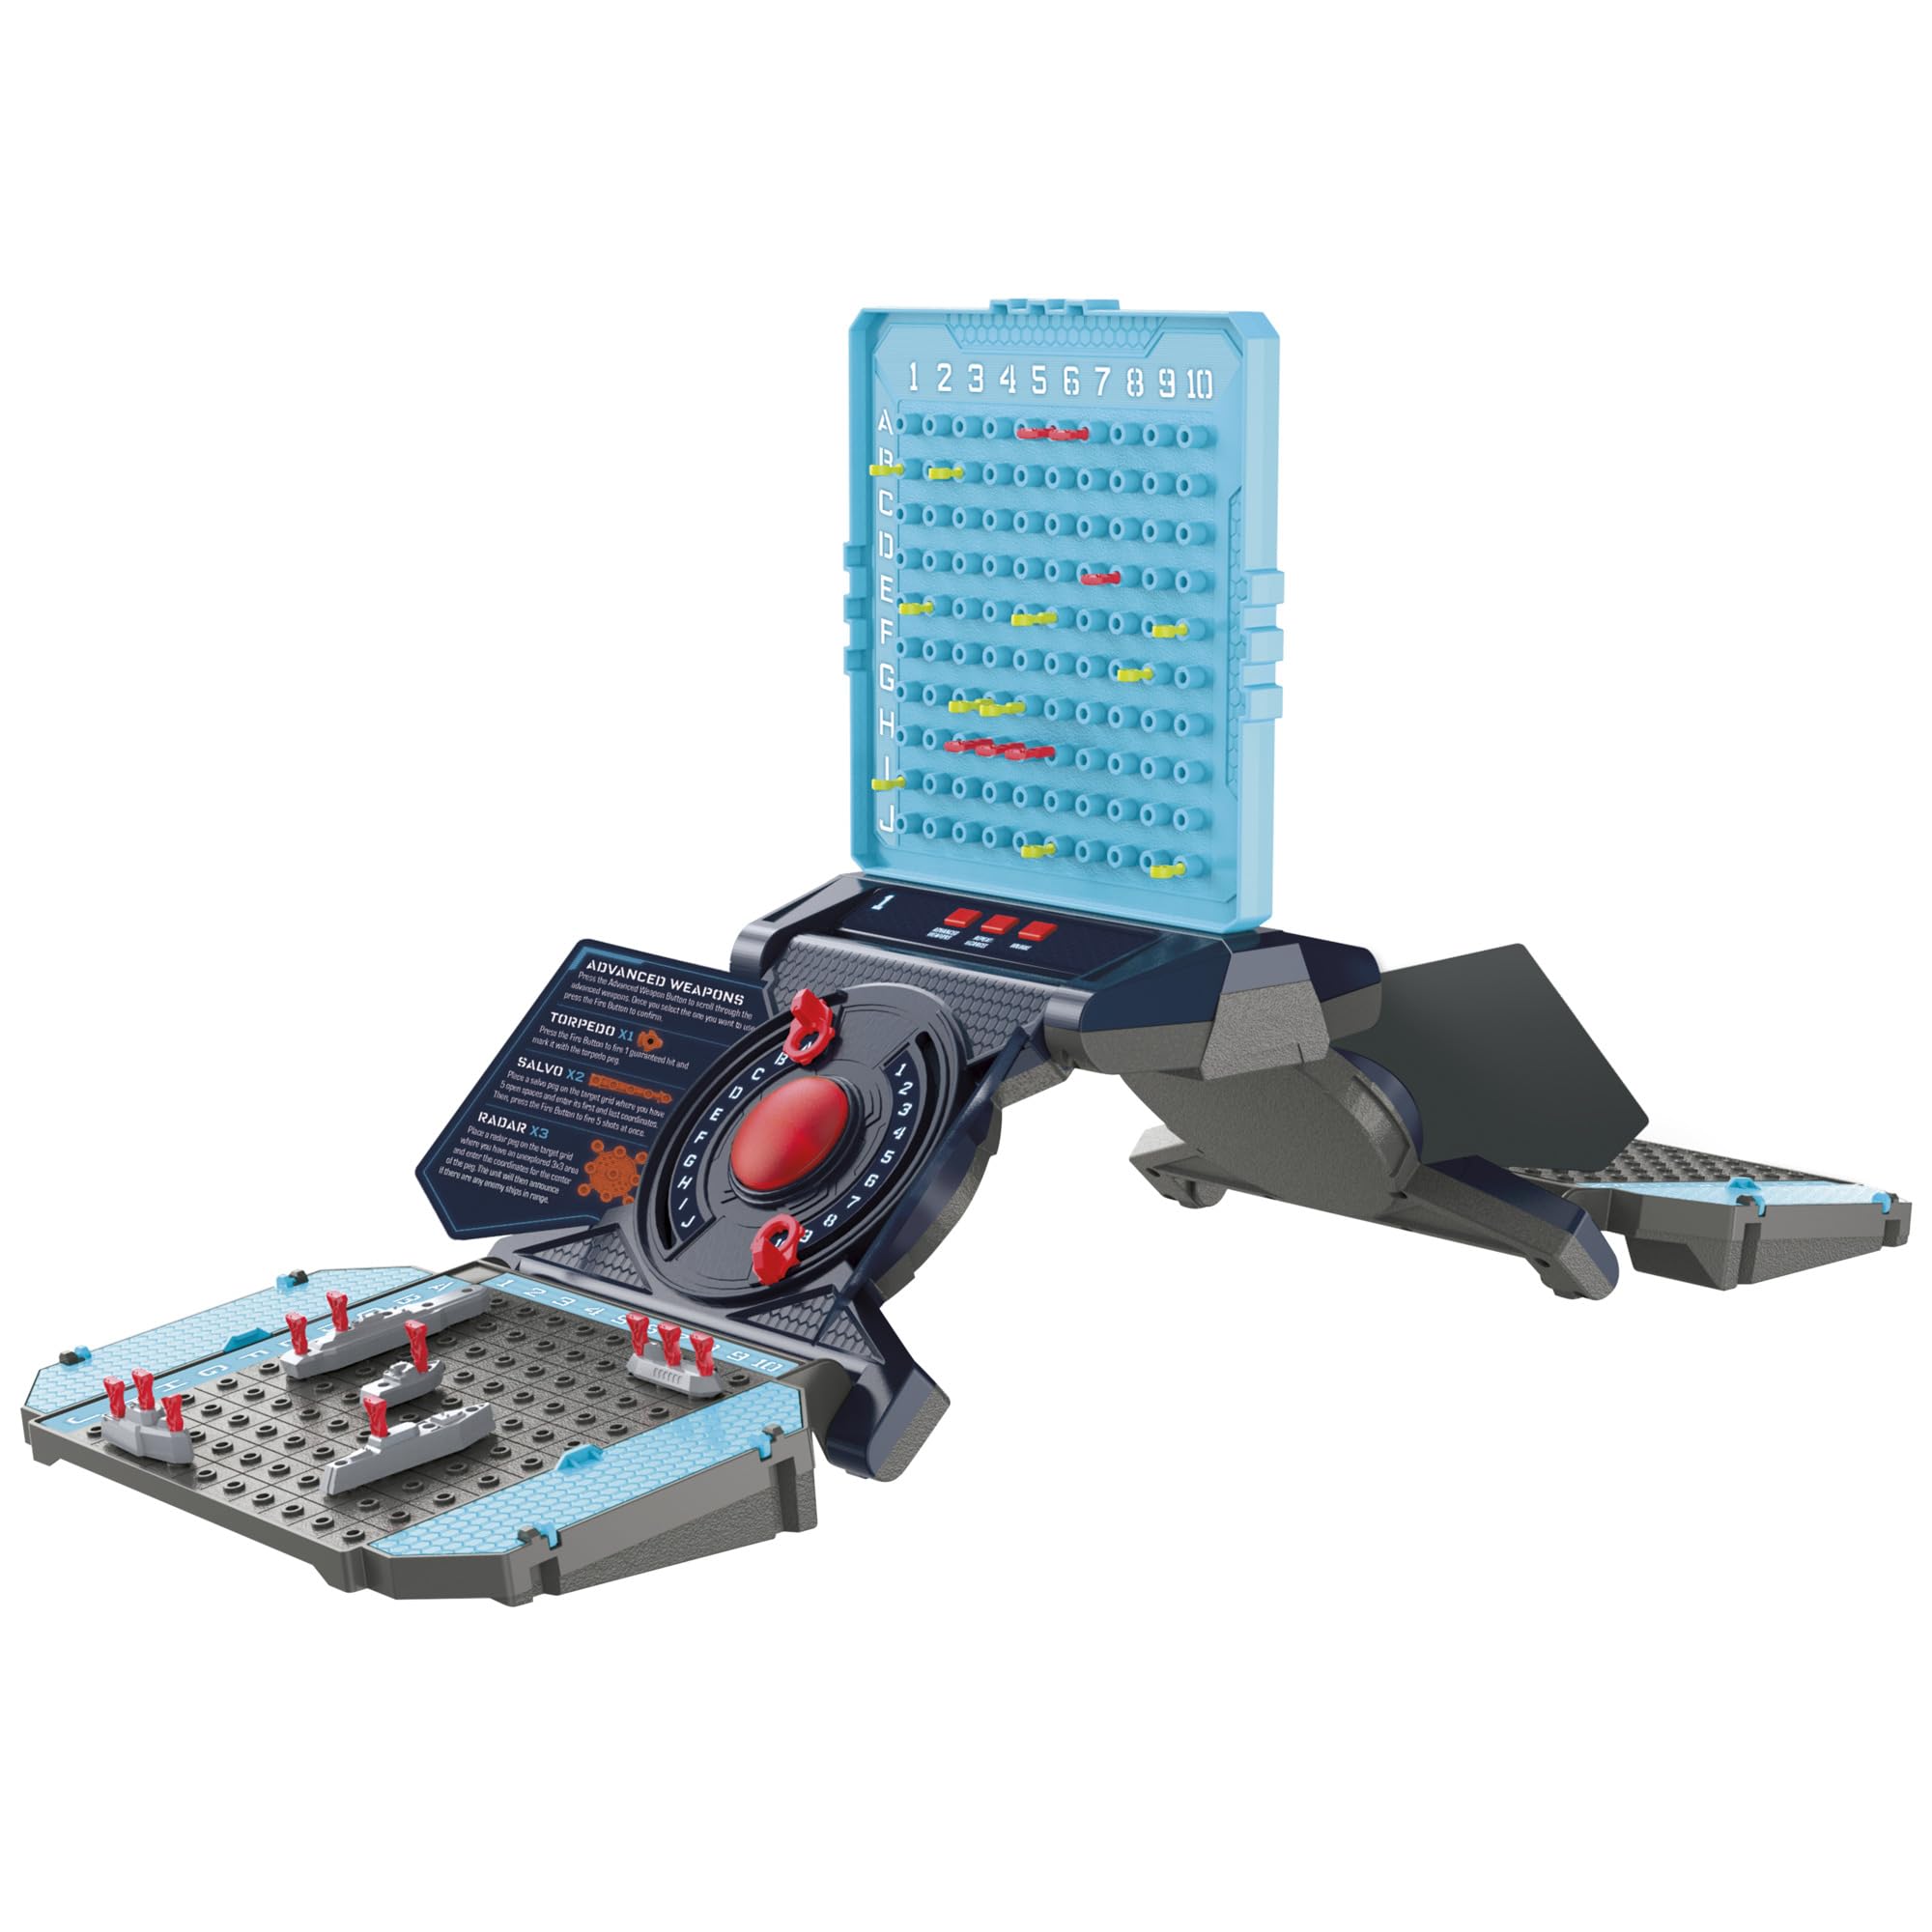 Hasbro Gaming Electronic Battleship Reloaded Board Game | Naval Combat Strategy Game with Sounds, Lights, Special Attacks | Ages 8 and Up | 1-2 Players | Kids Games